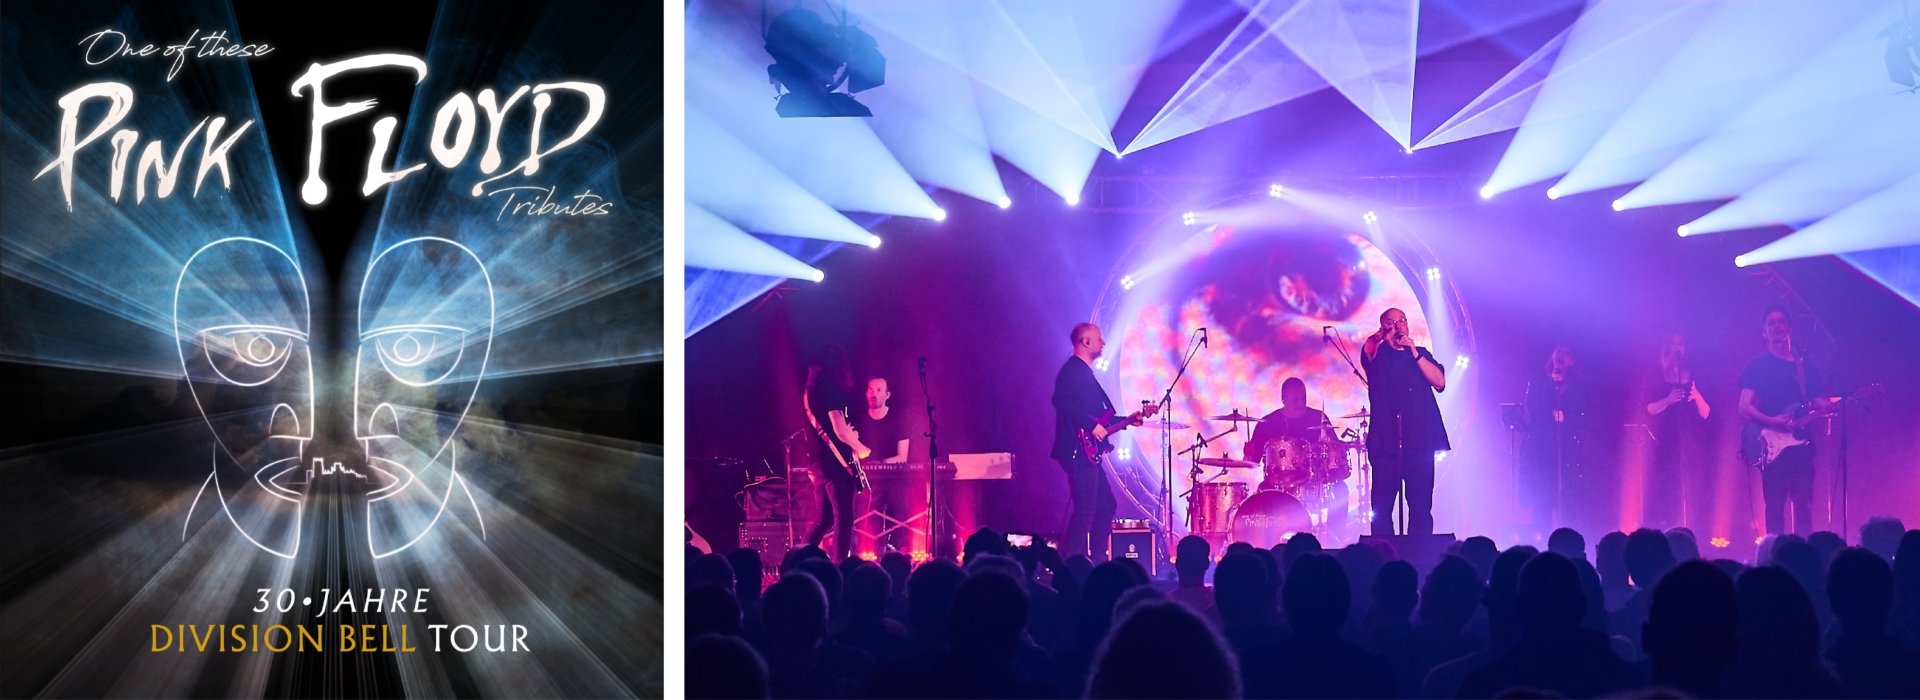 One Of These Pink Floyd Tributes: 30 Jahre Division Bell